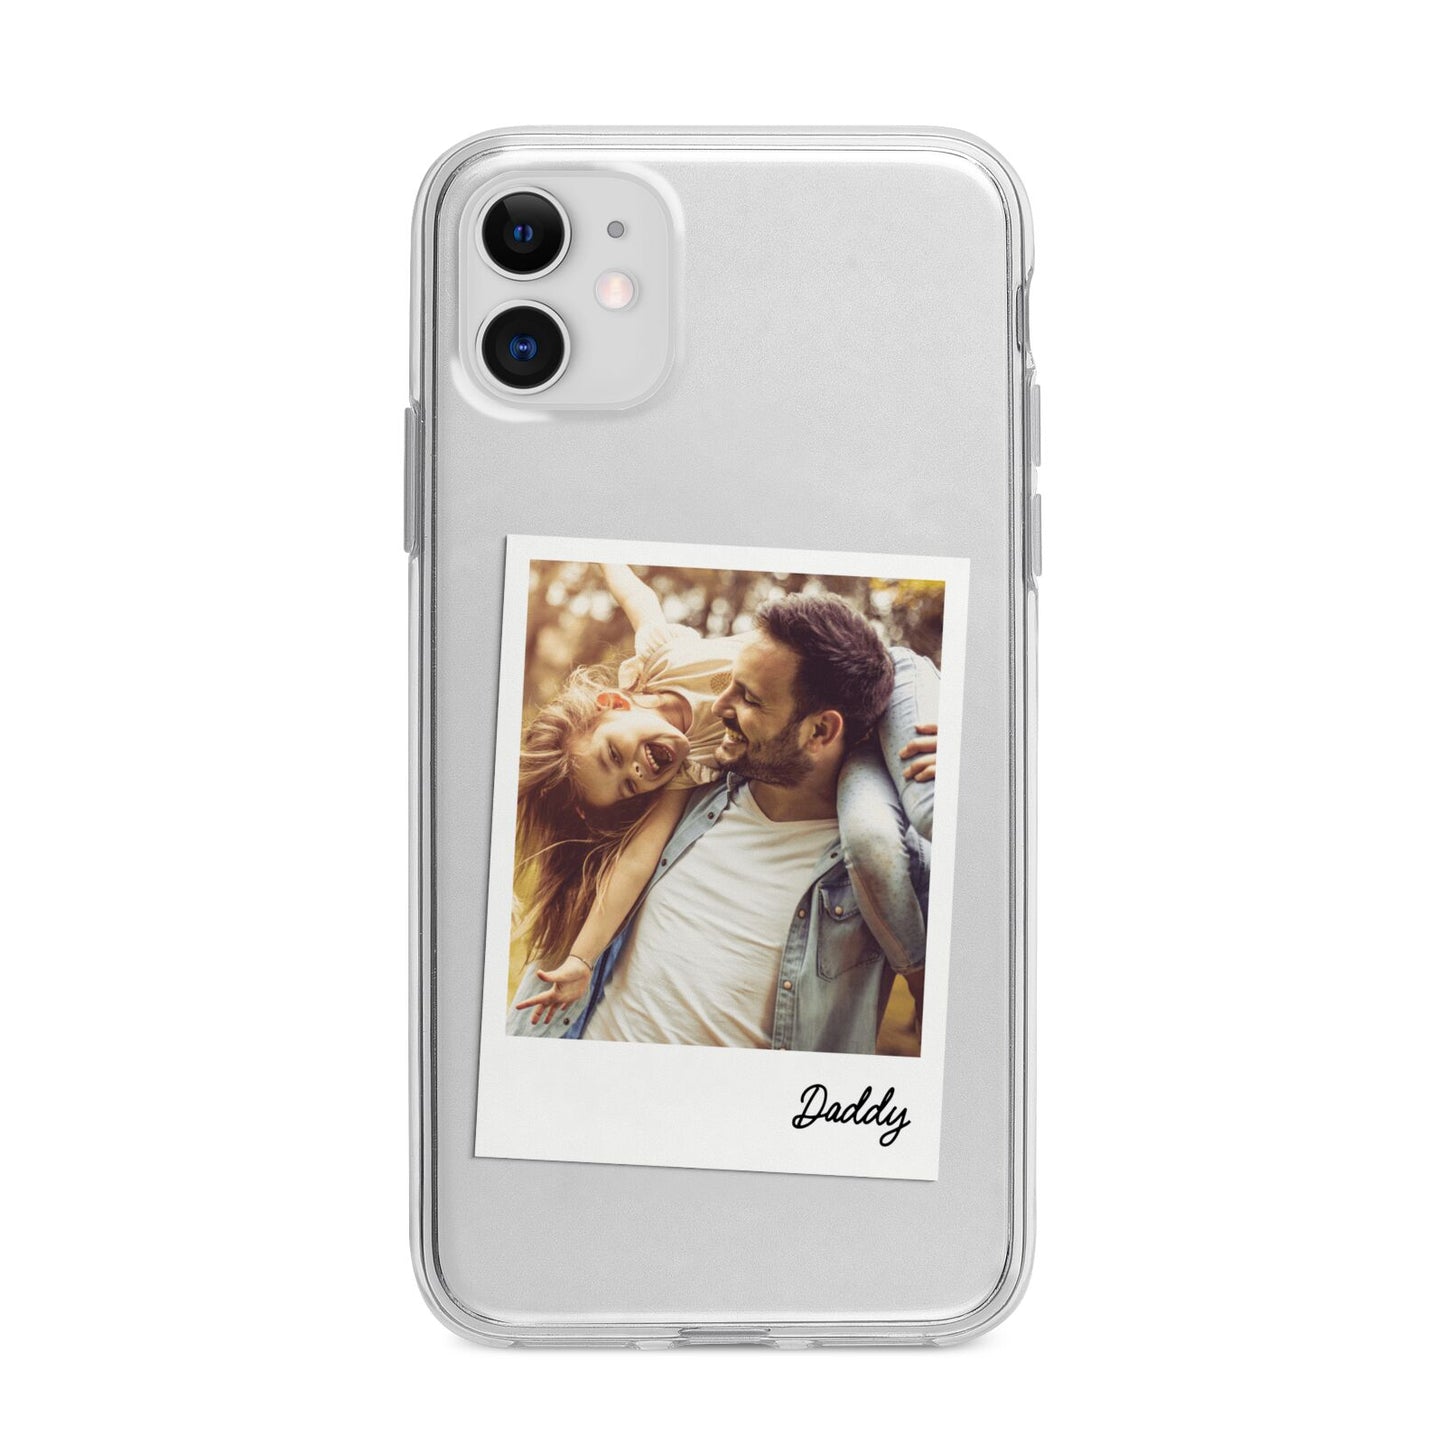 Fathers Day Photo Apple iPhone 11 in White with Bumper Case